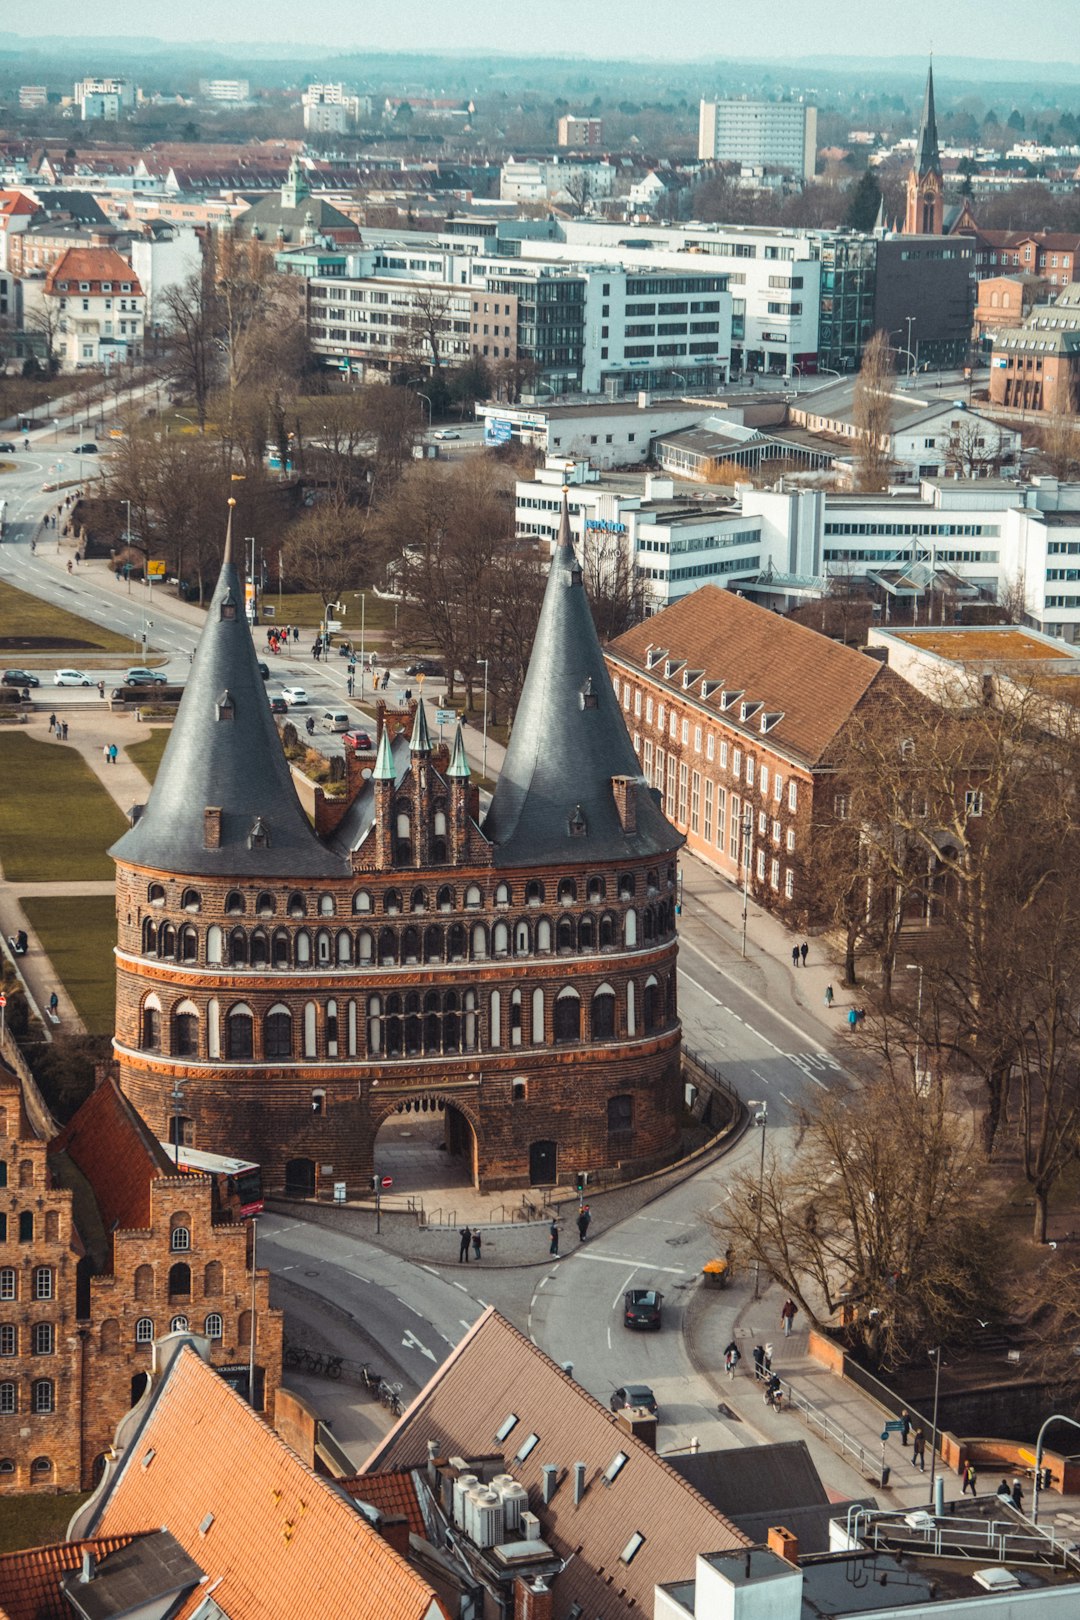 Museum Holstentor - From St. Peter's Church, Germany